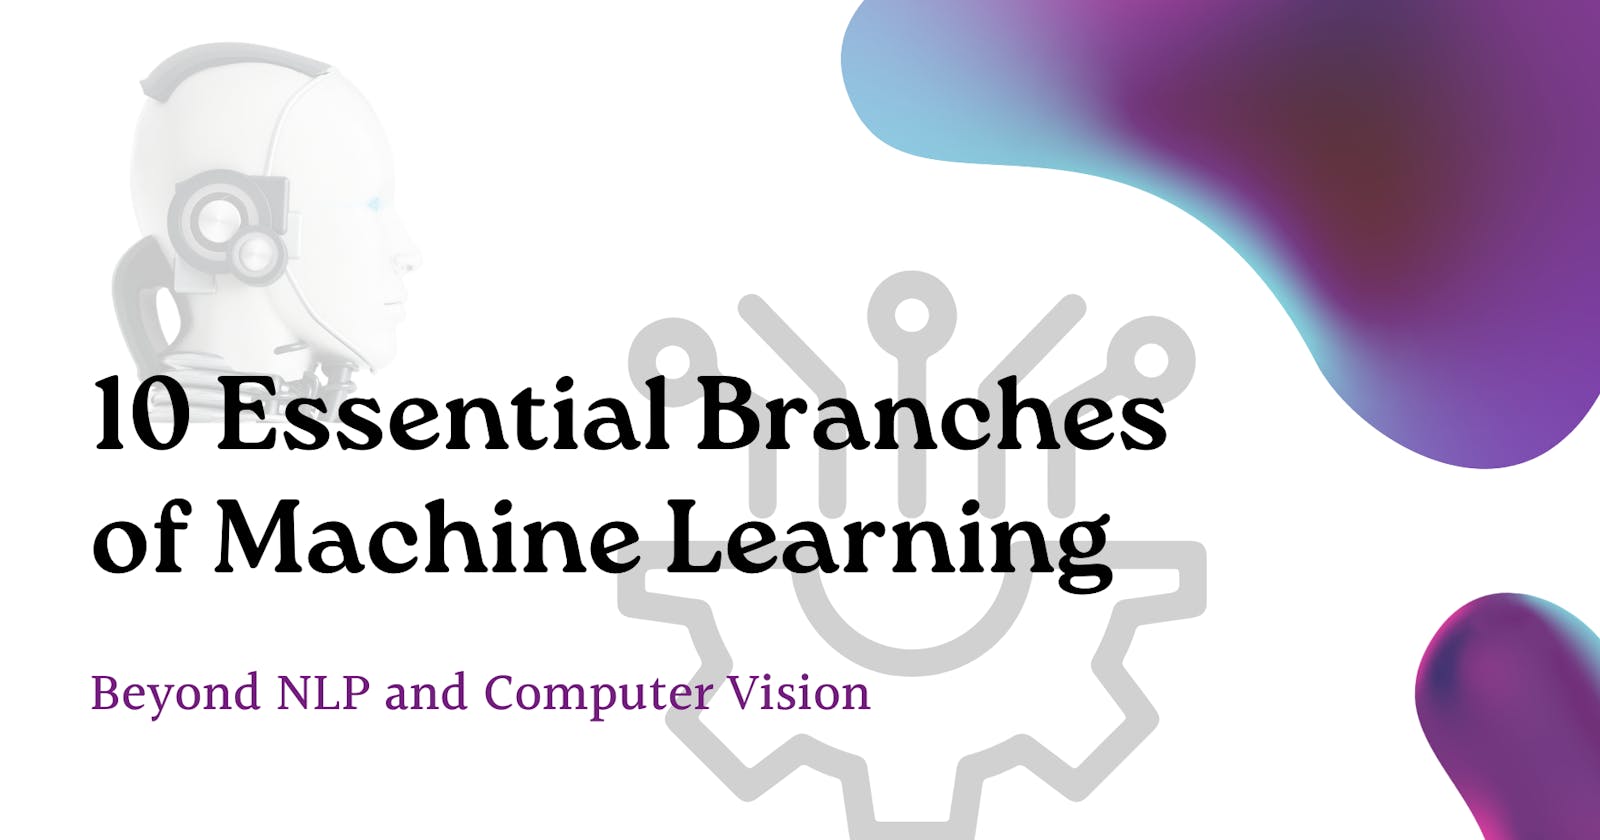 Exploring the Diversity of Machine Learning: 10 Essential Branches Beyond NLP and Computer Vision